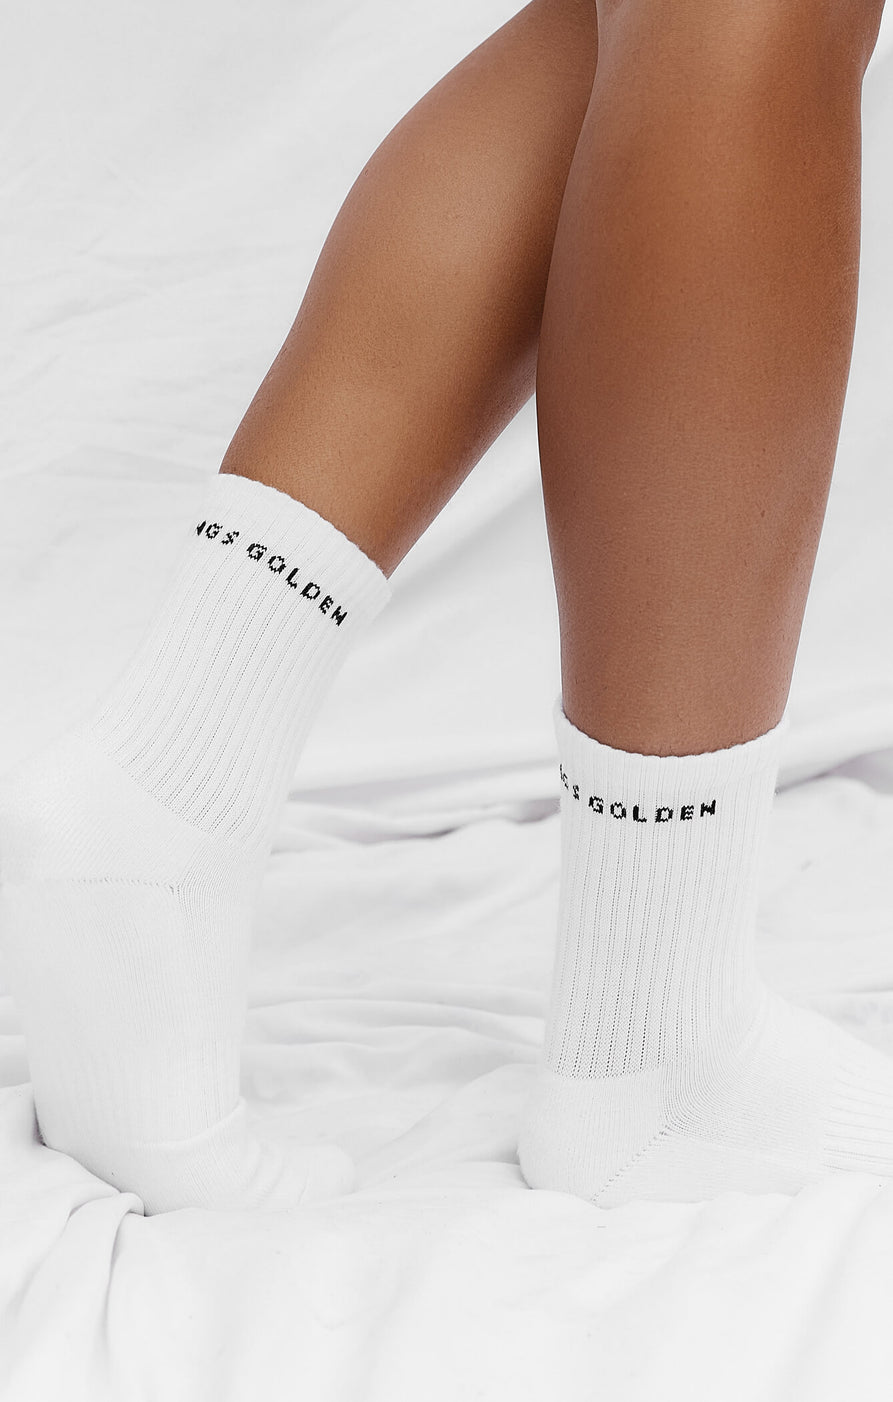 THE A.T.G CREW SOCK - 3 PACK WHITE